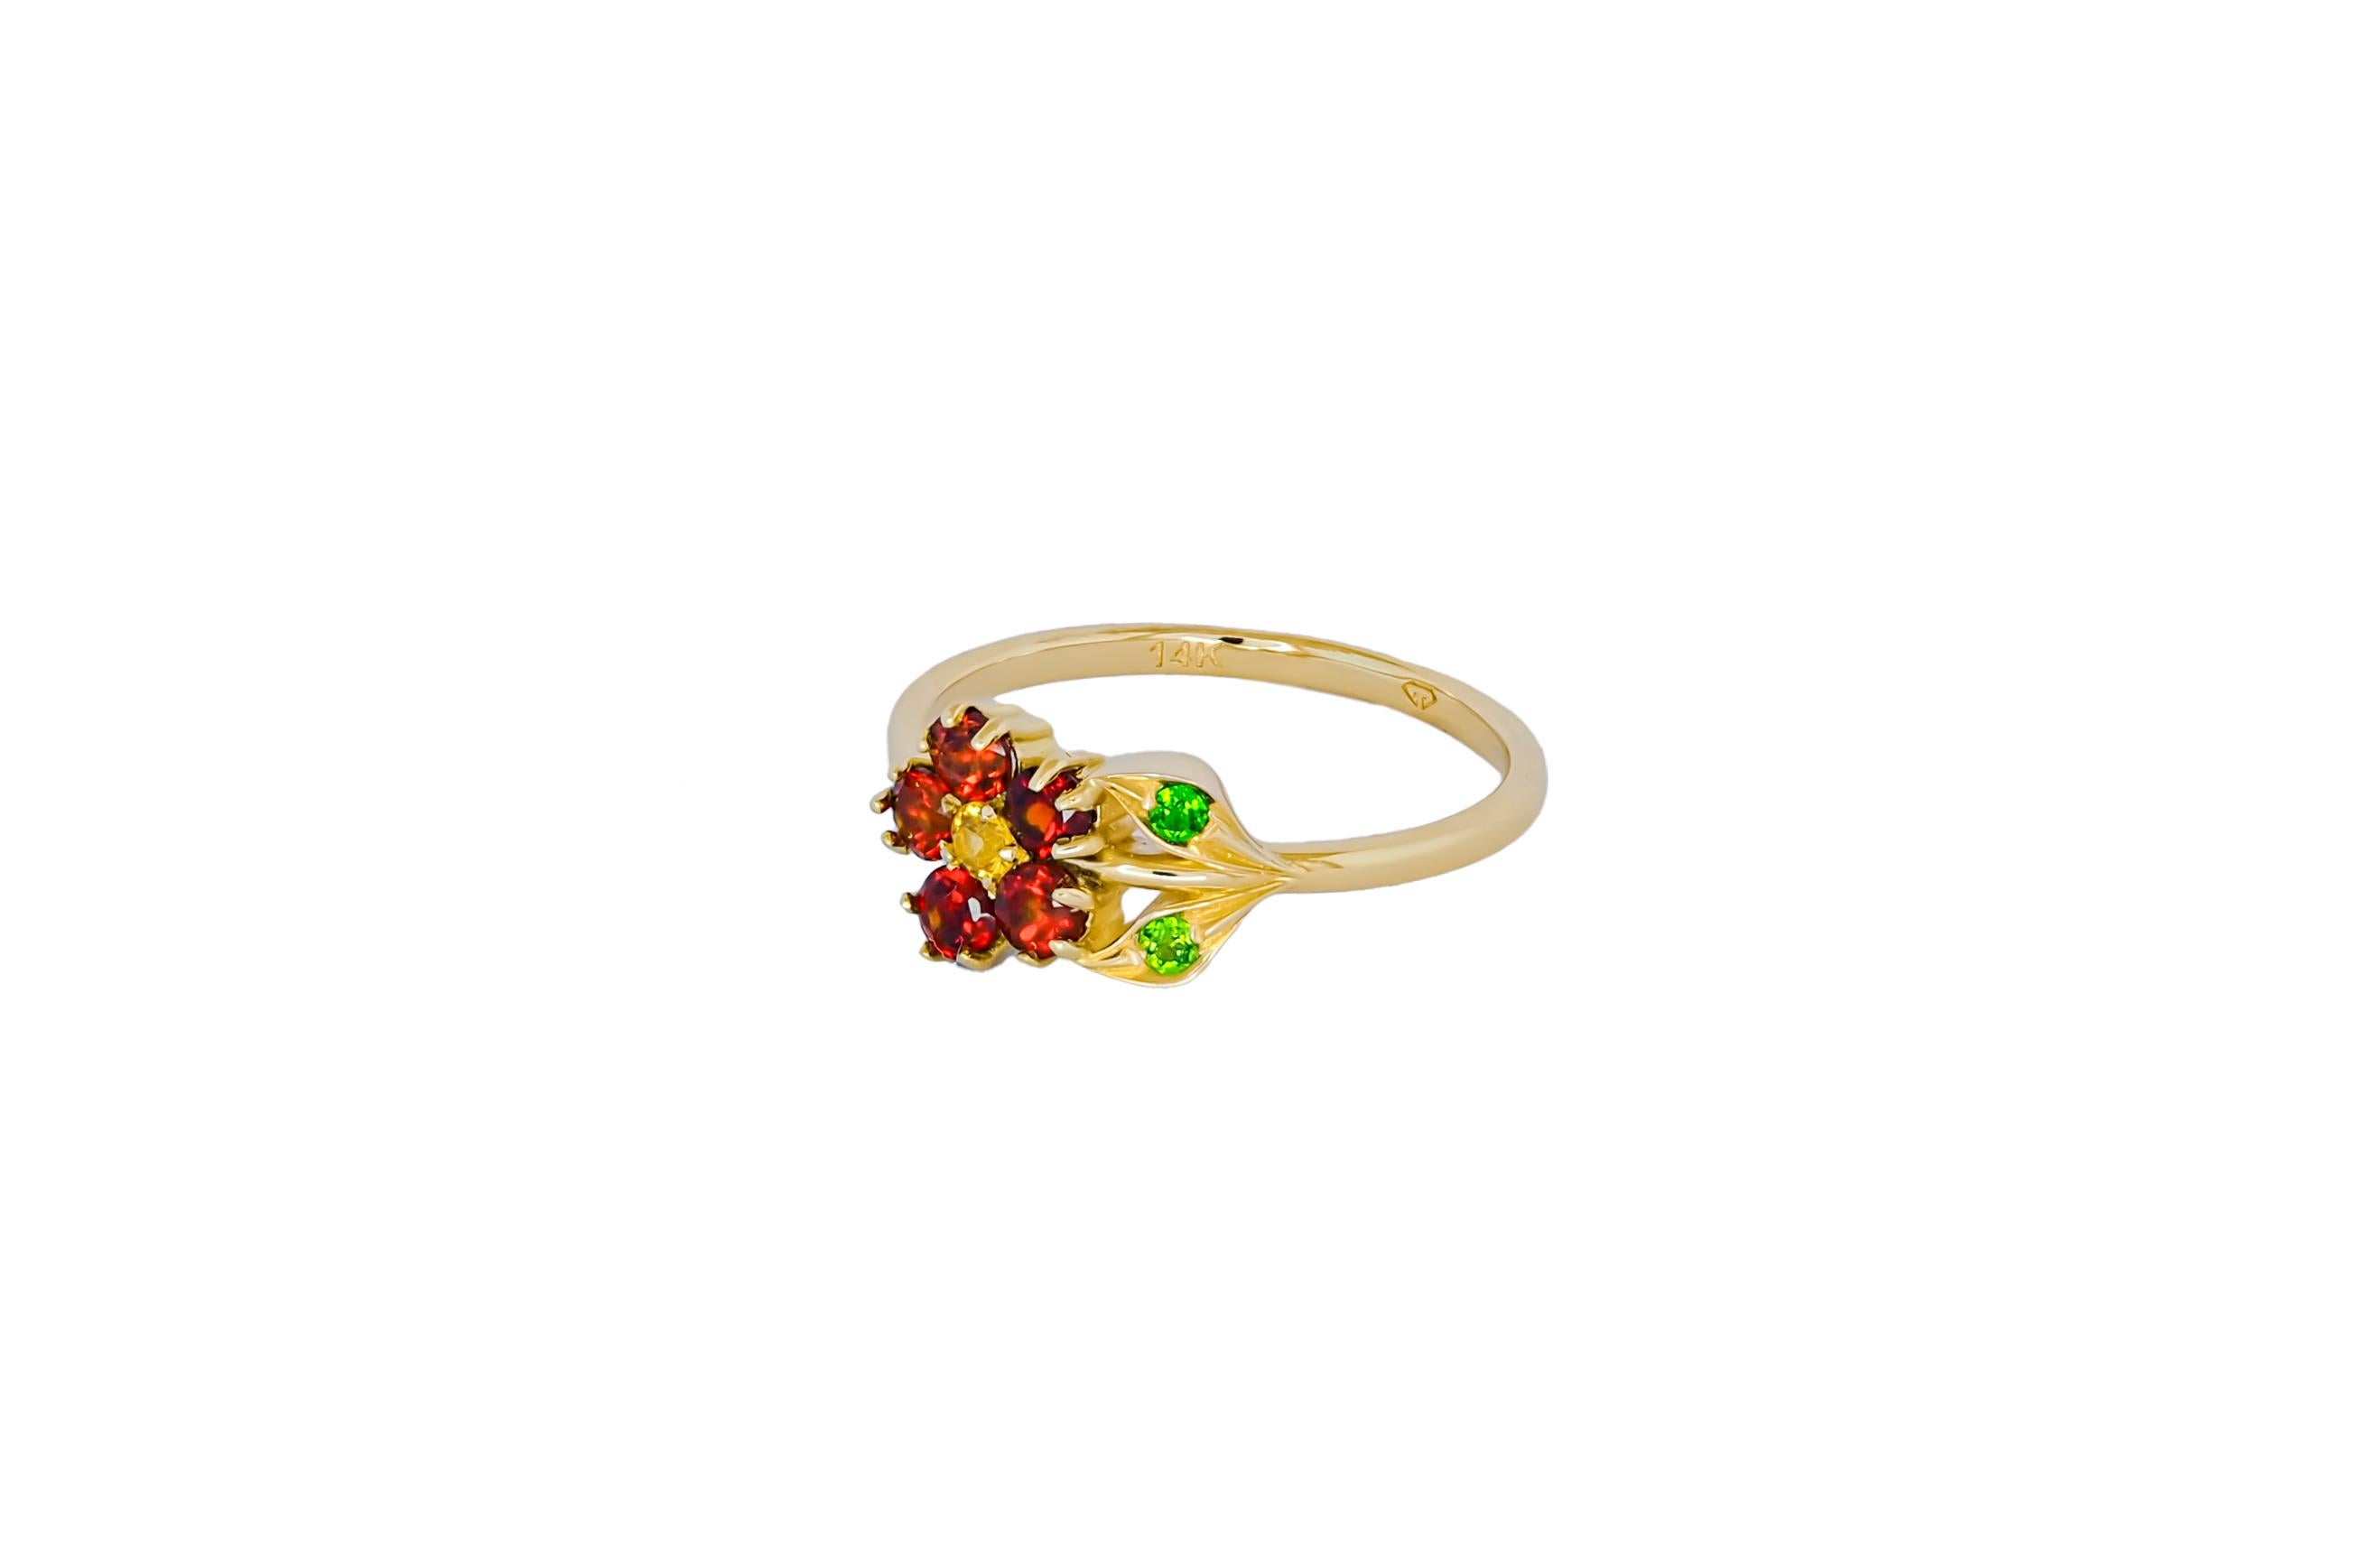 Flower Ring in 14 Karat Gold, Sapphire, Garnet and Chrome Diopsides Ring.  For Sale 3